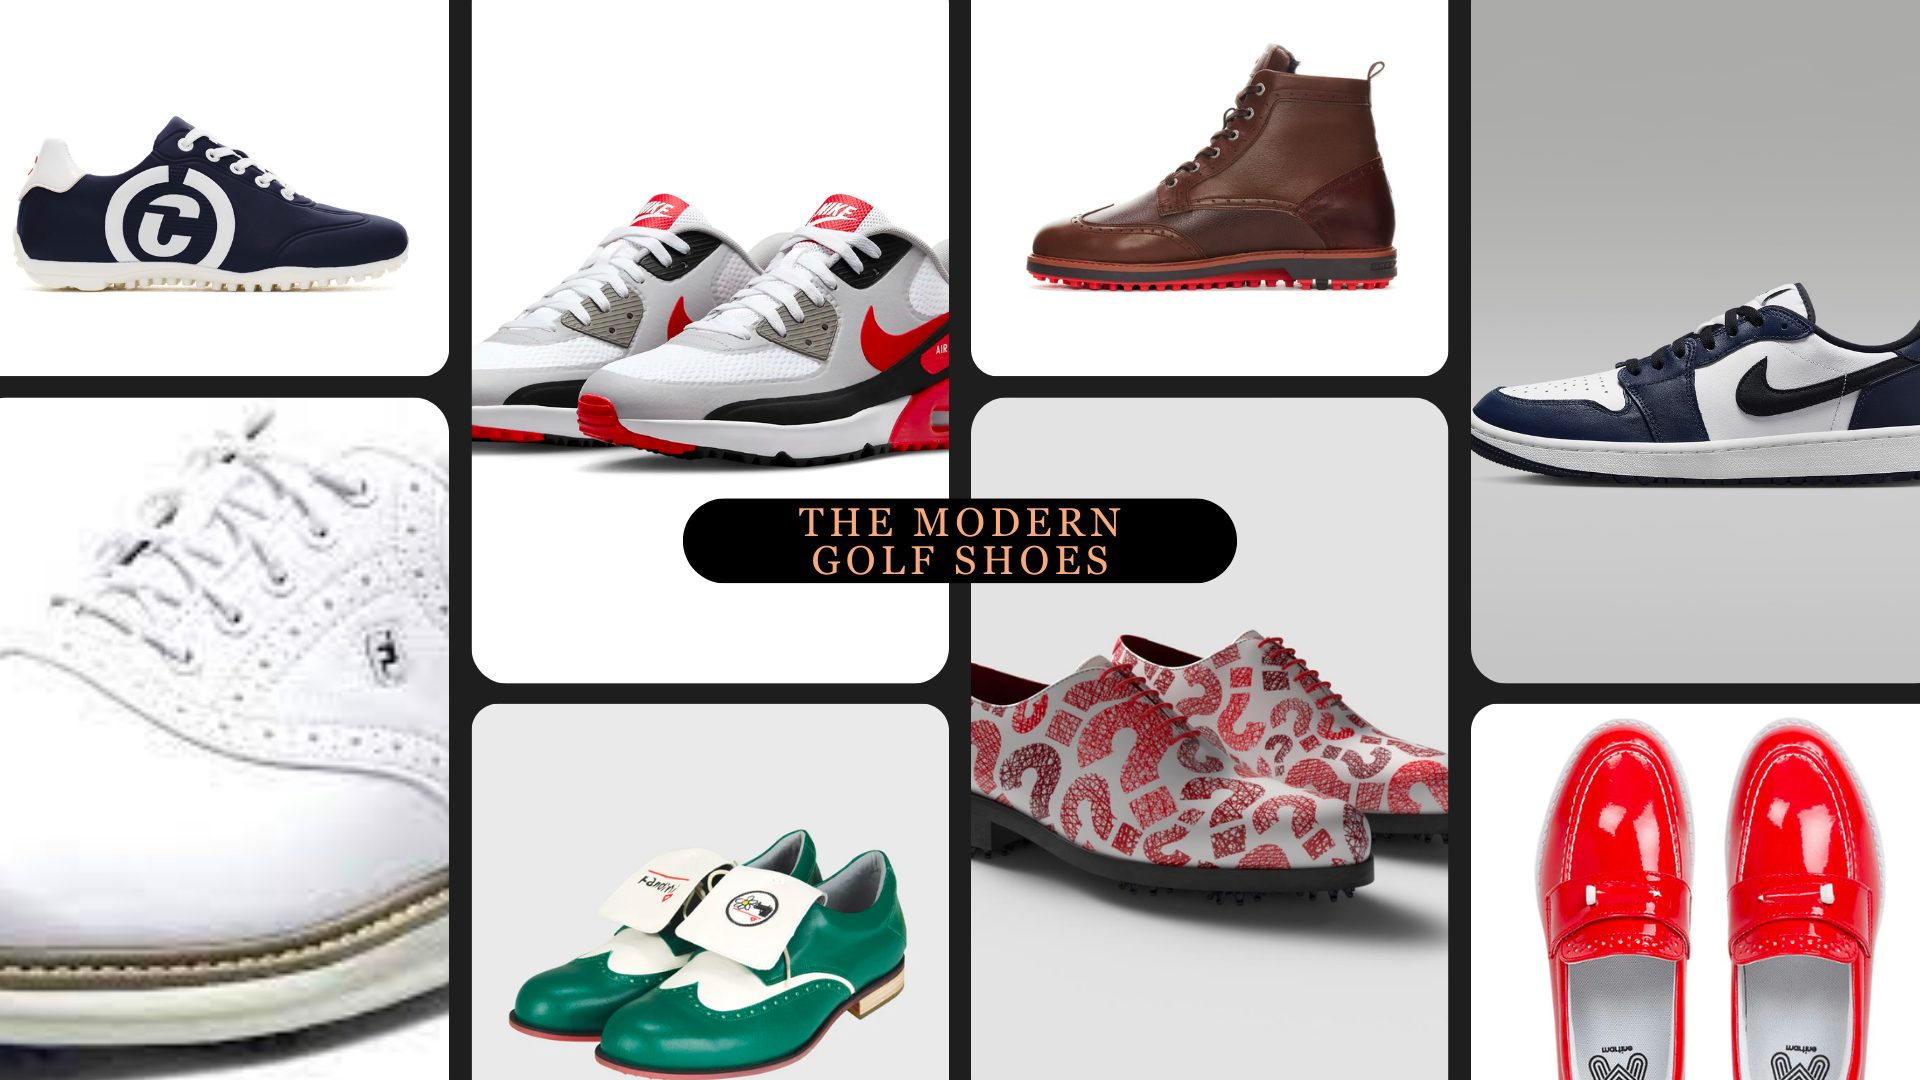 The modern golf shoes, many variations and styles to choose from